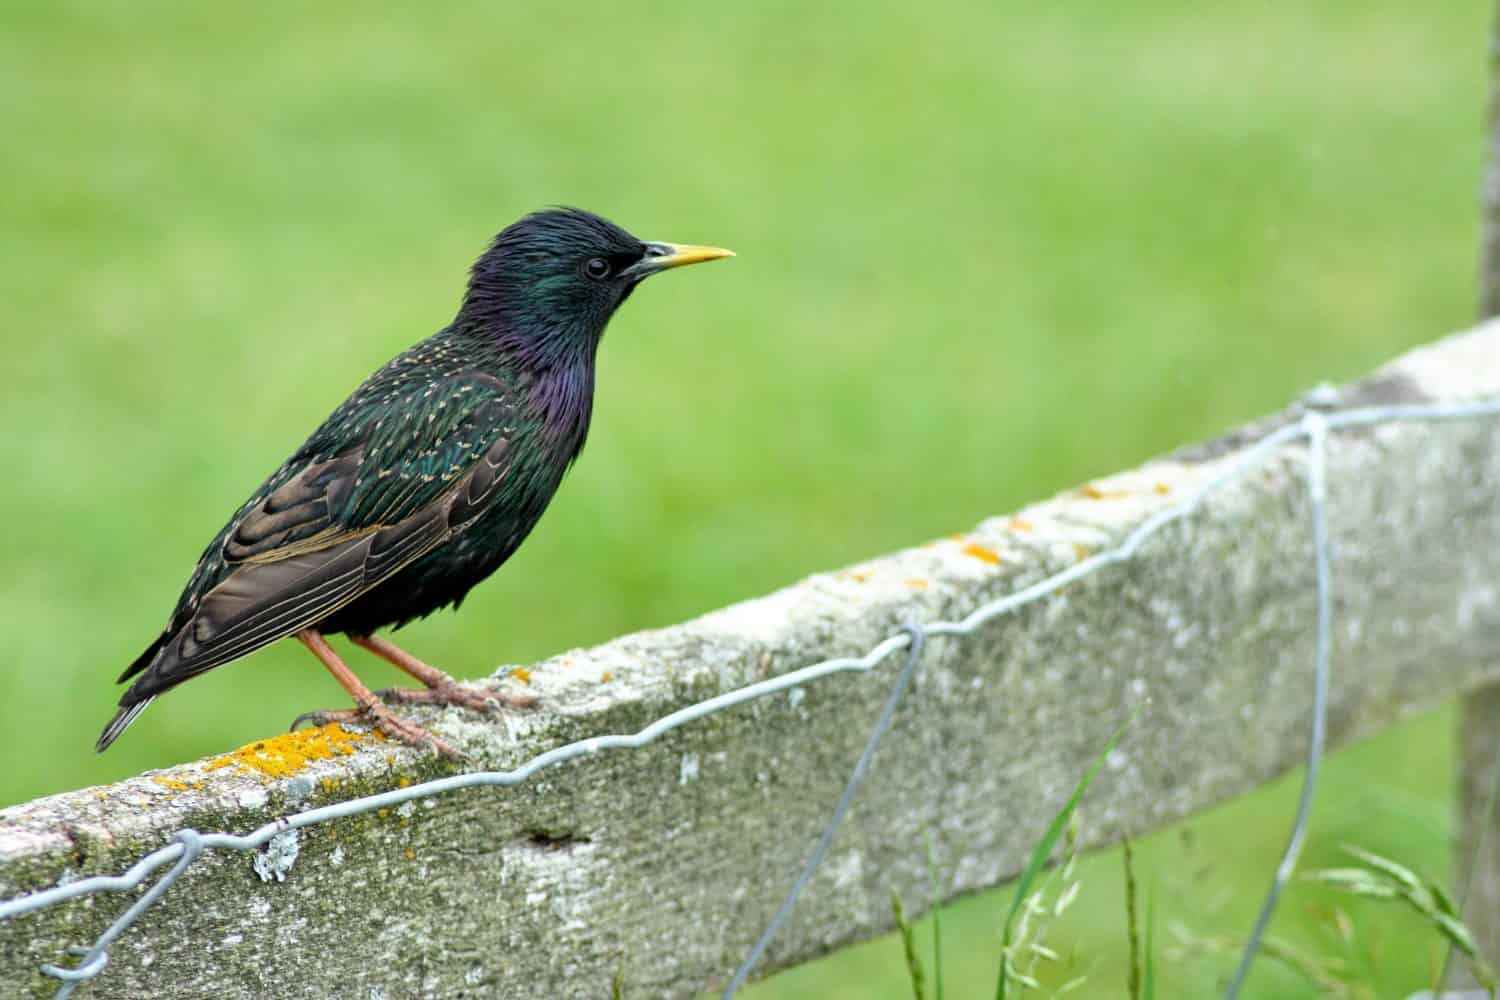 The common starling (Sturnus vulgaris), also known as the European starling, or in the British Isles just the starling, is a medium-sized passerine bird in the starling family, Sturnidae.